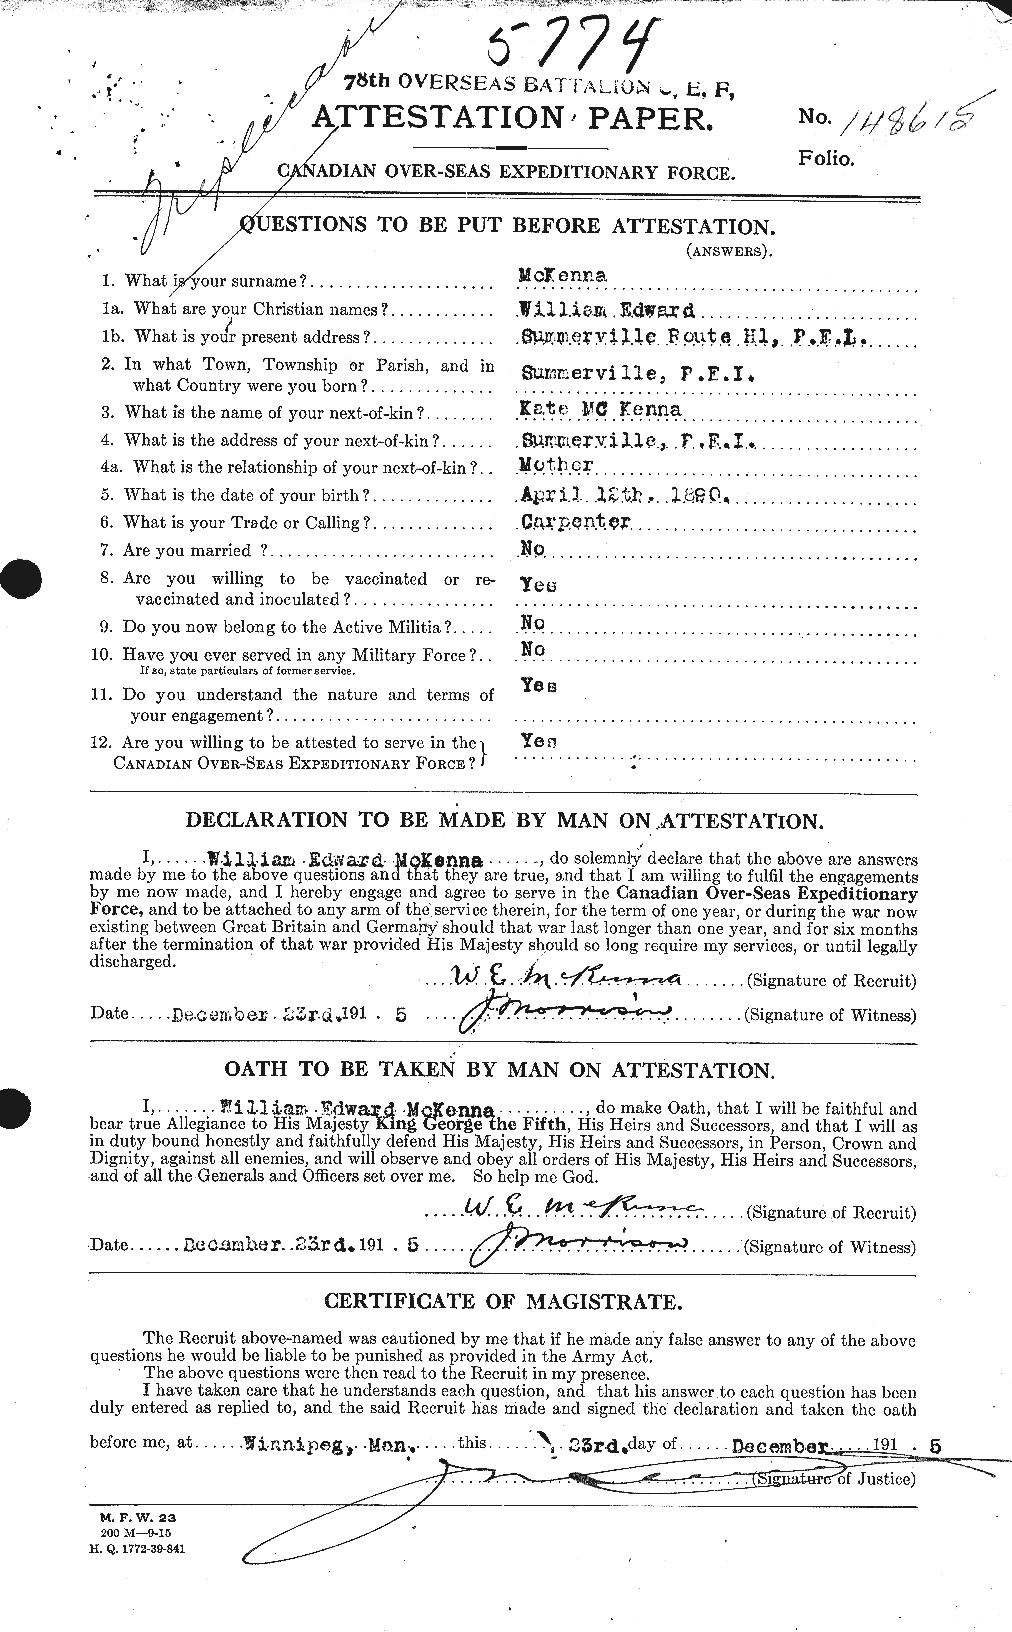 Personnel Records of the First World War - CEF 528683a